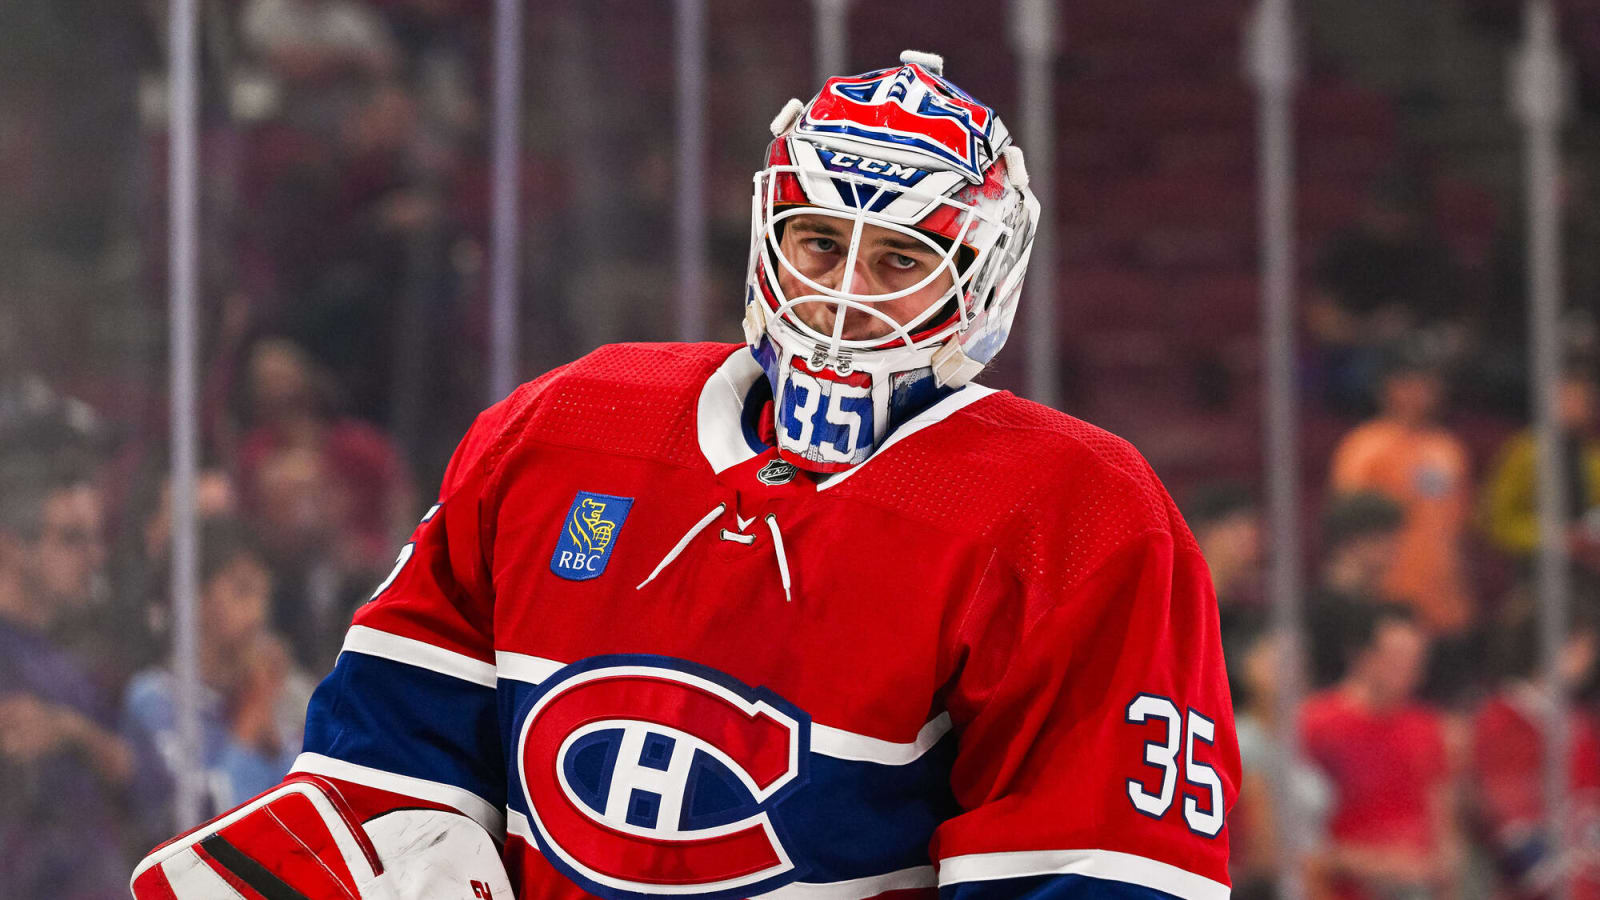 Canadiens Game 22: Montembeault Starts, Armia Enters Lineup